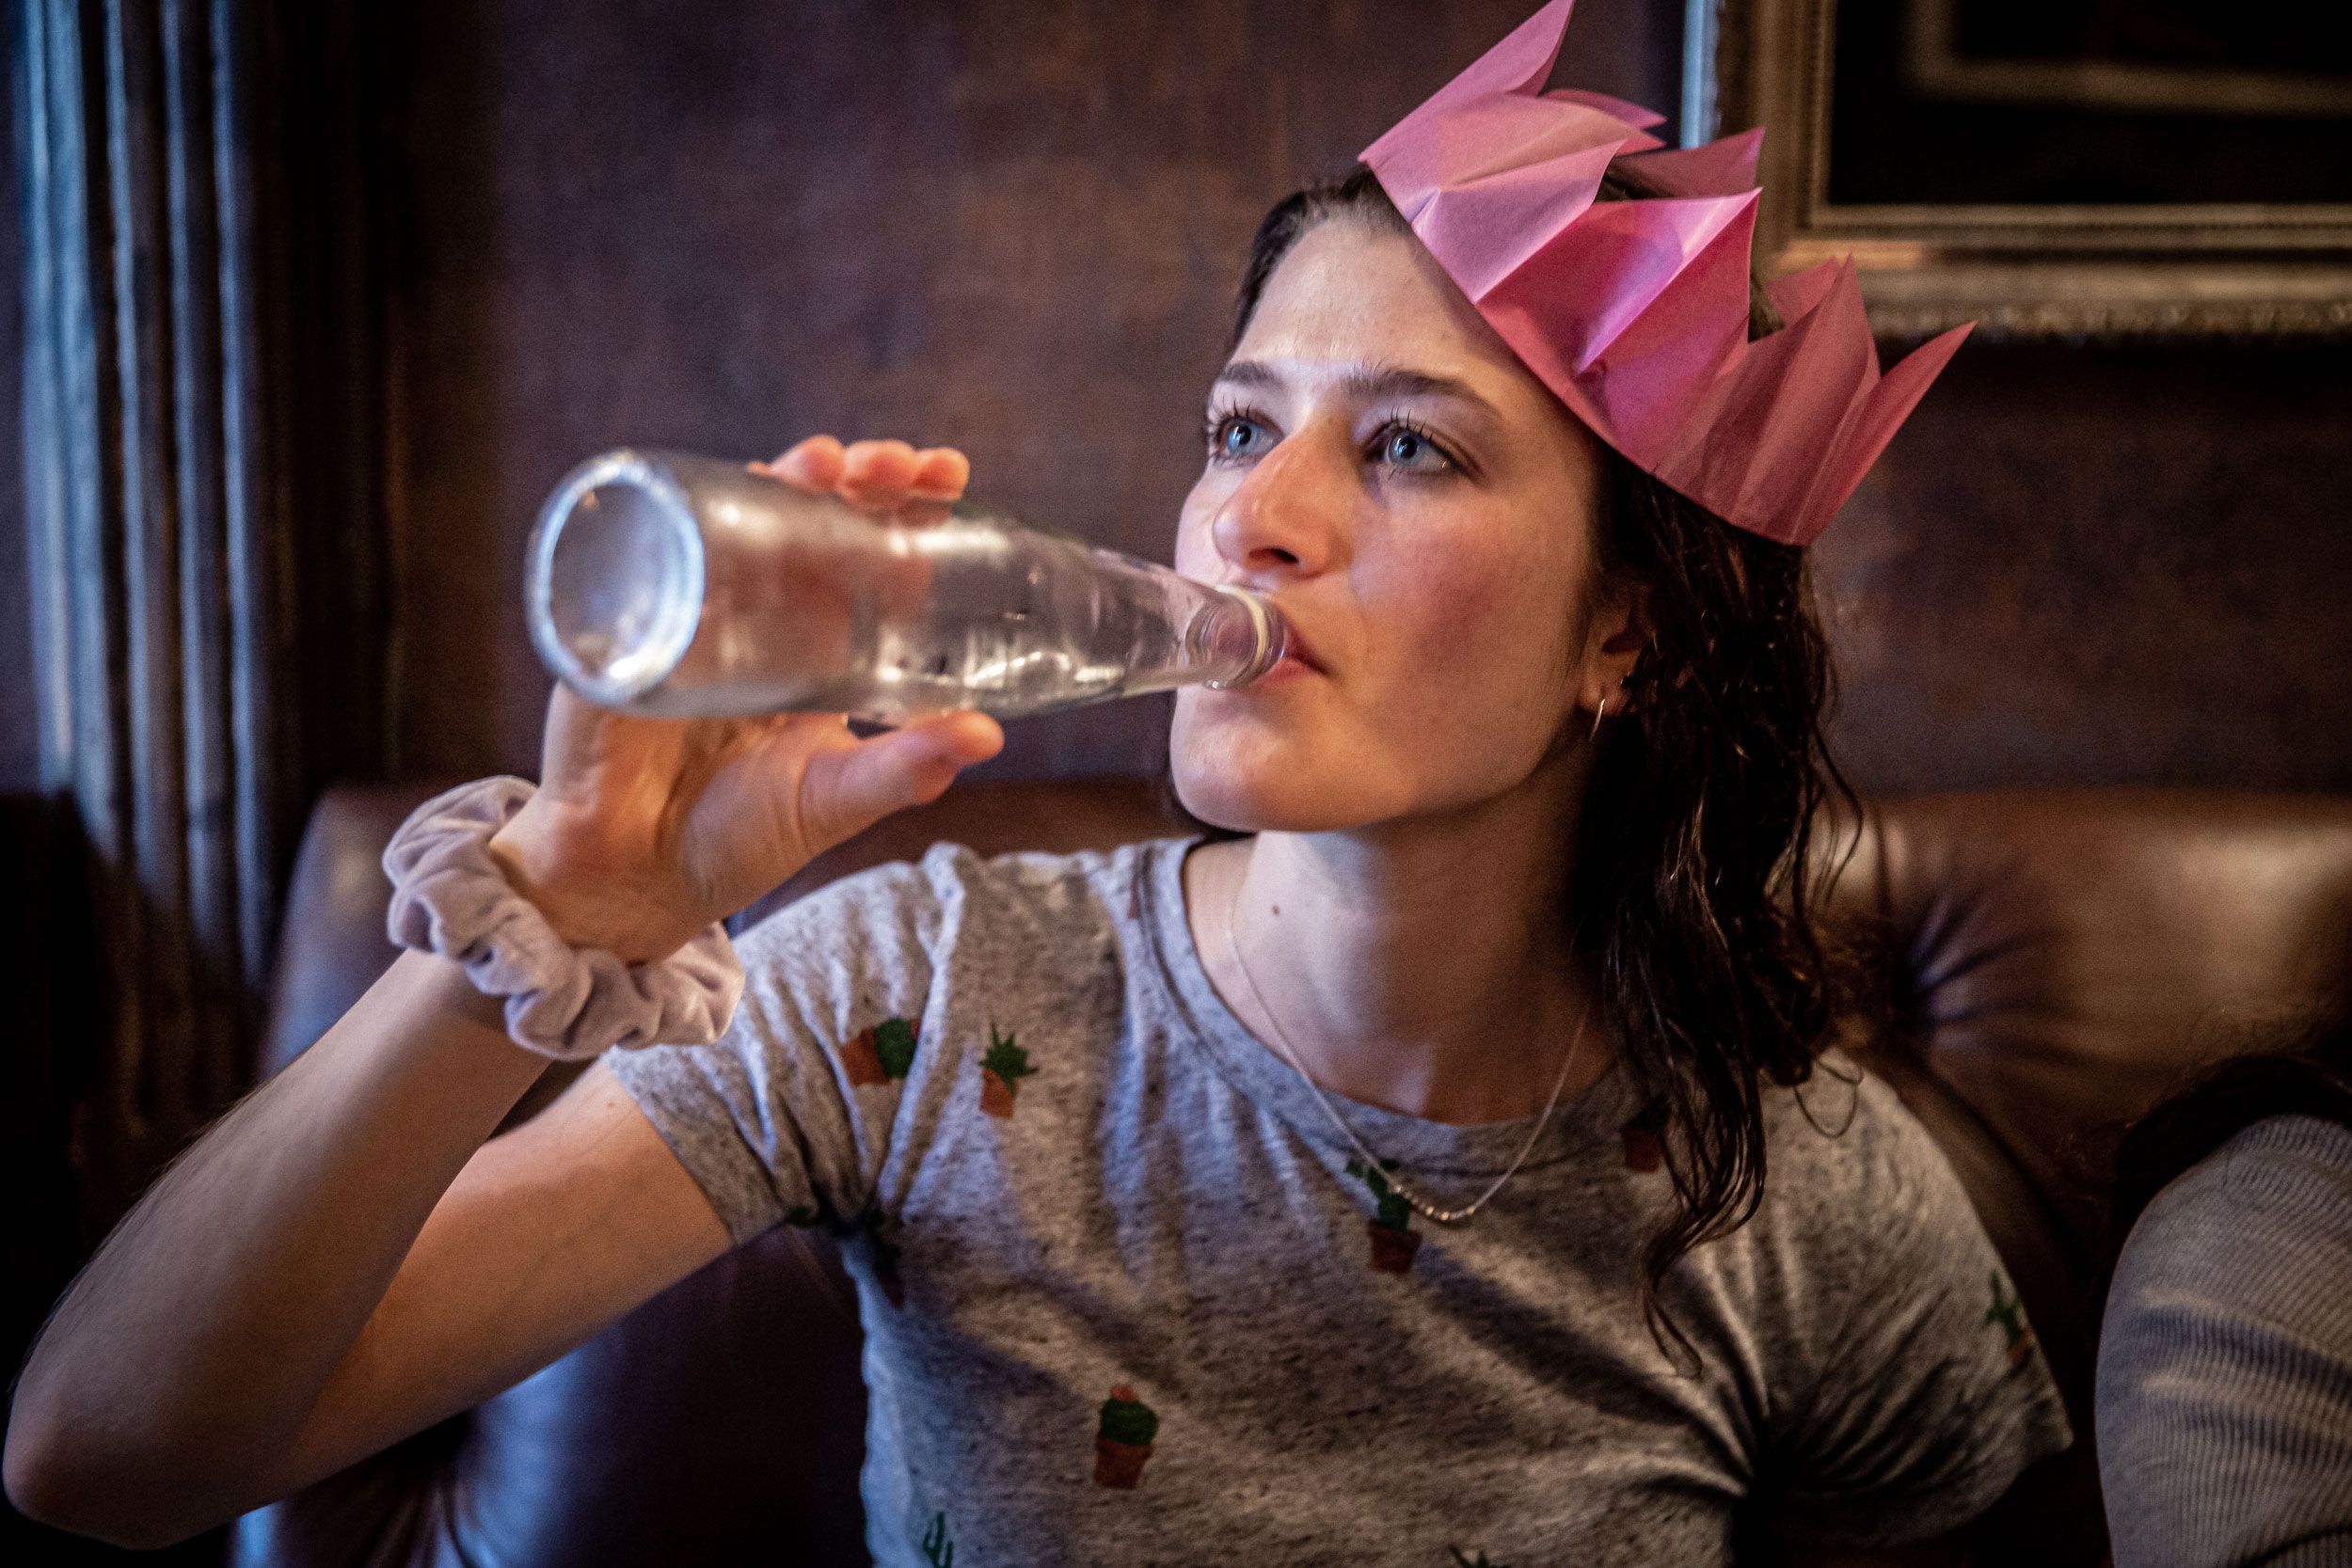 Woman with Paper Crown Finishes Drink 